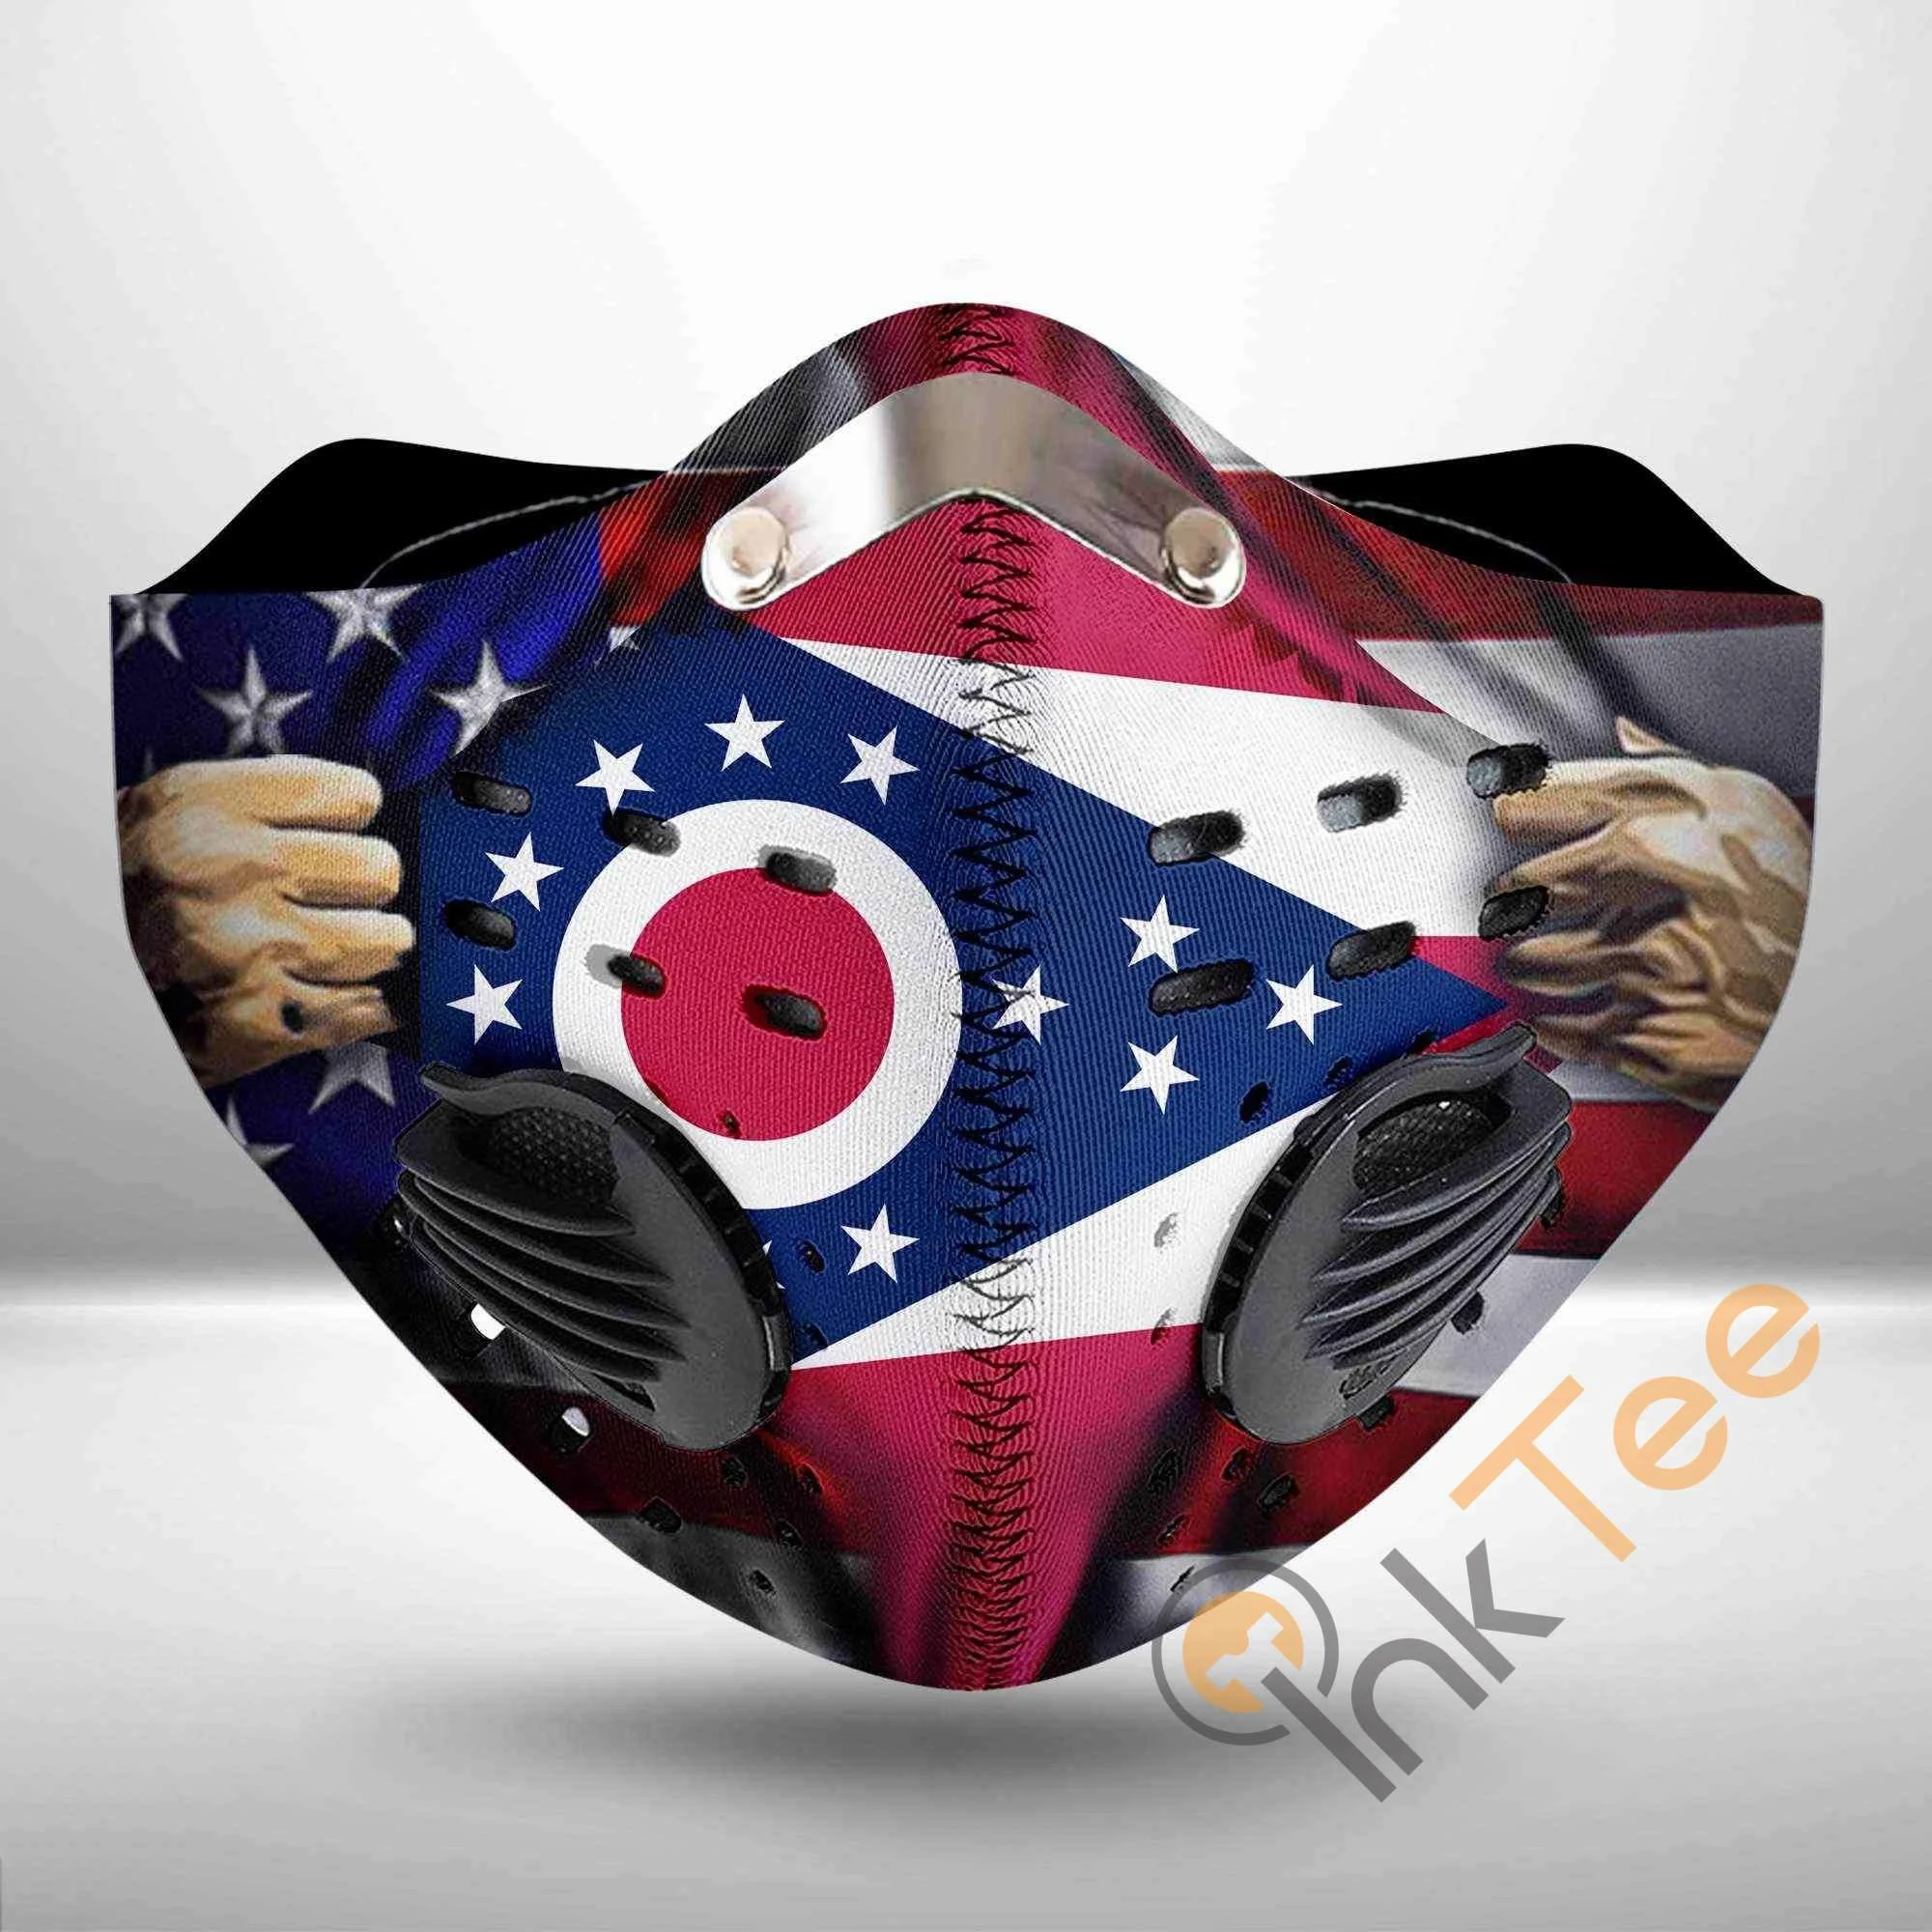 Ohio Filter Activated Carbon Pm 2.5 Face Mask